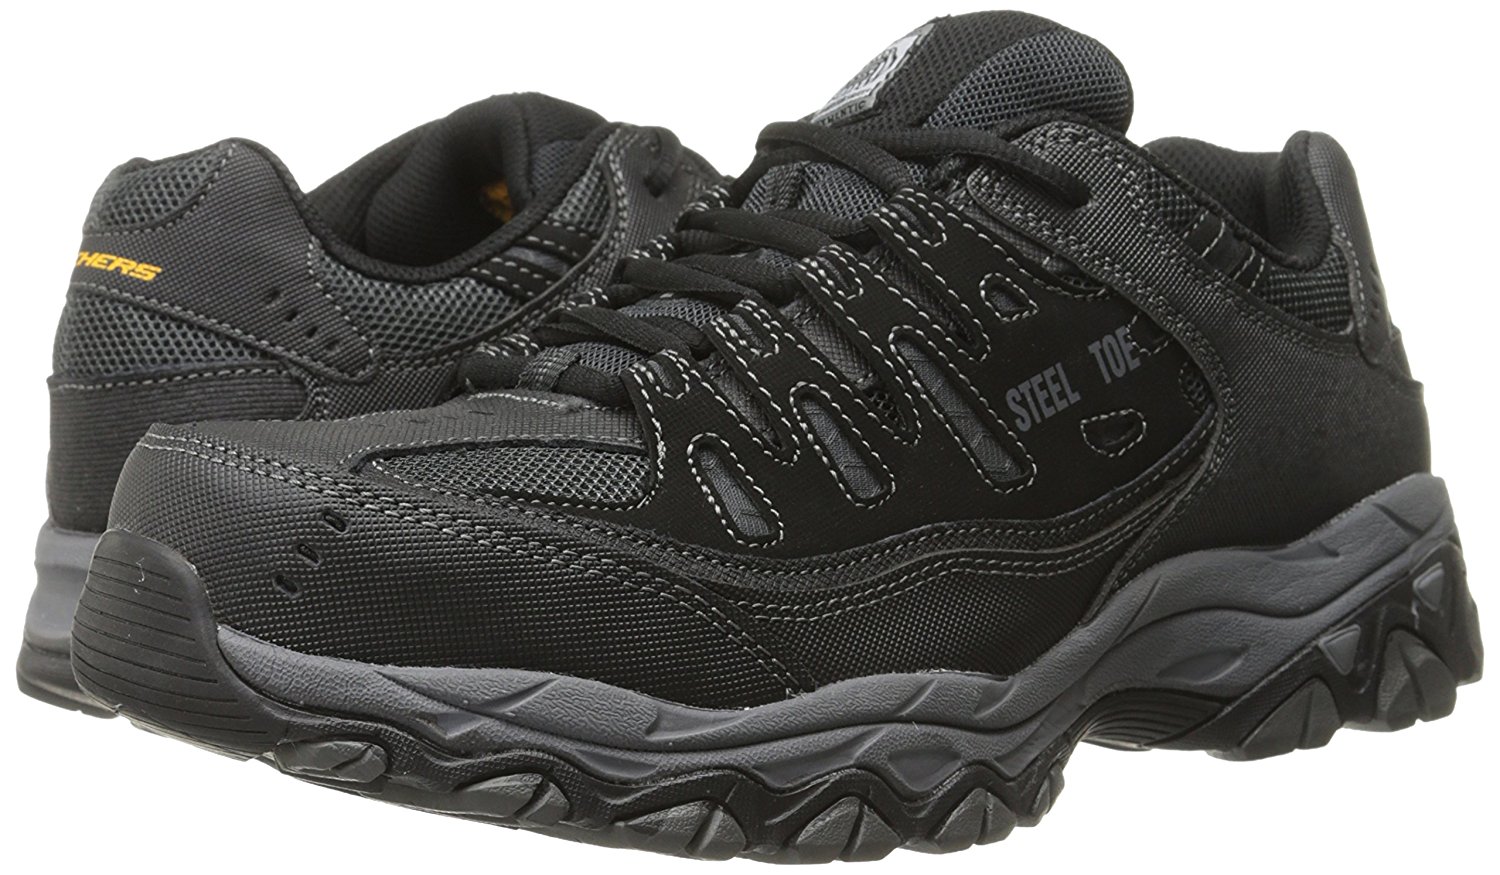 Skechers Mens Crankton Steel toe Lace Up Safety Shoes, Black/Charcoal ...